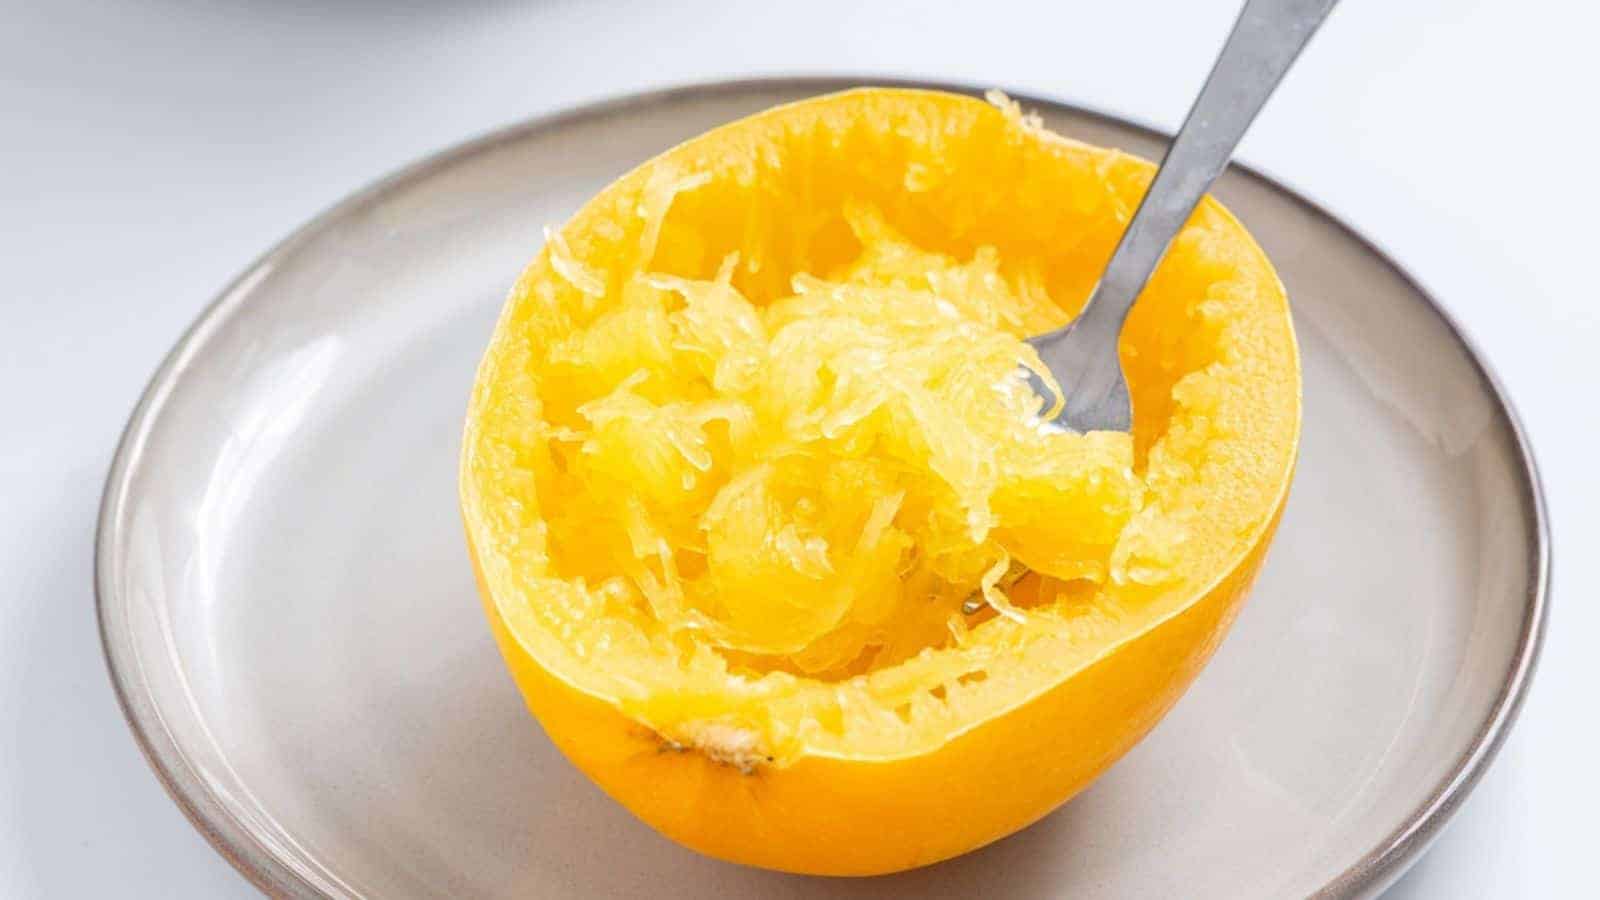 A halved spaghetti squash on a plate with a fork scooping out the stringy, cooked flesh.